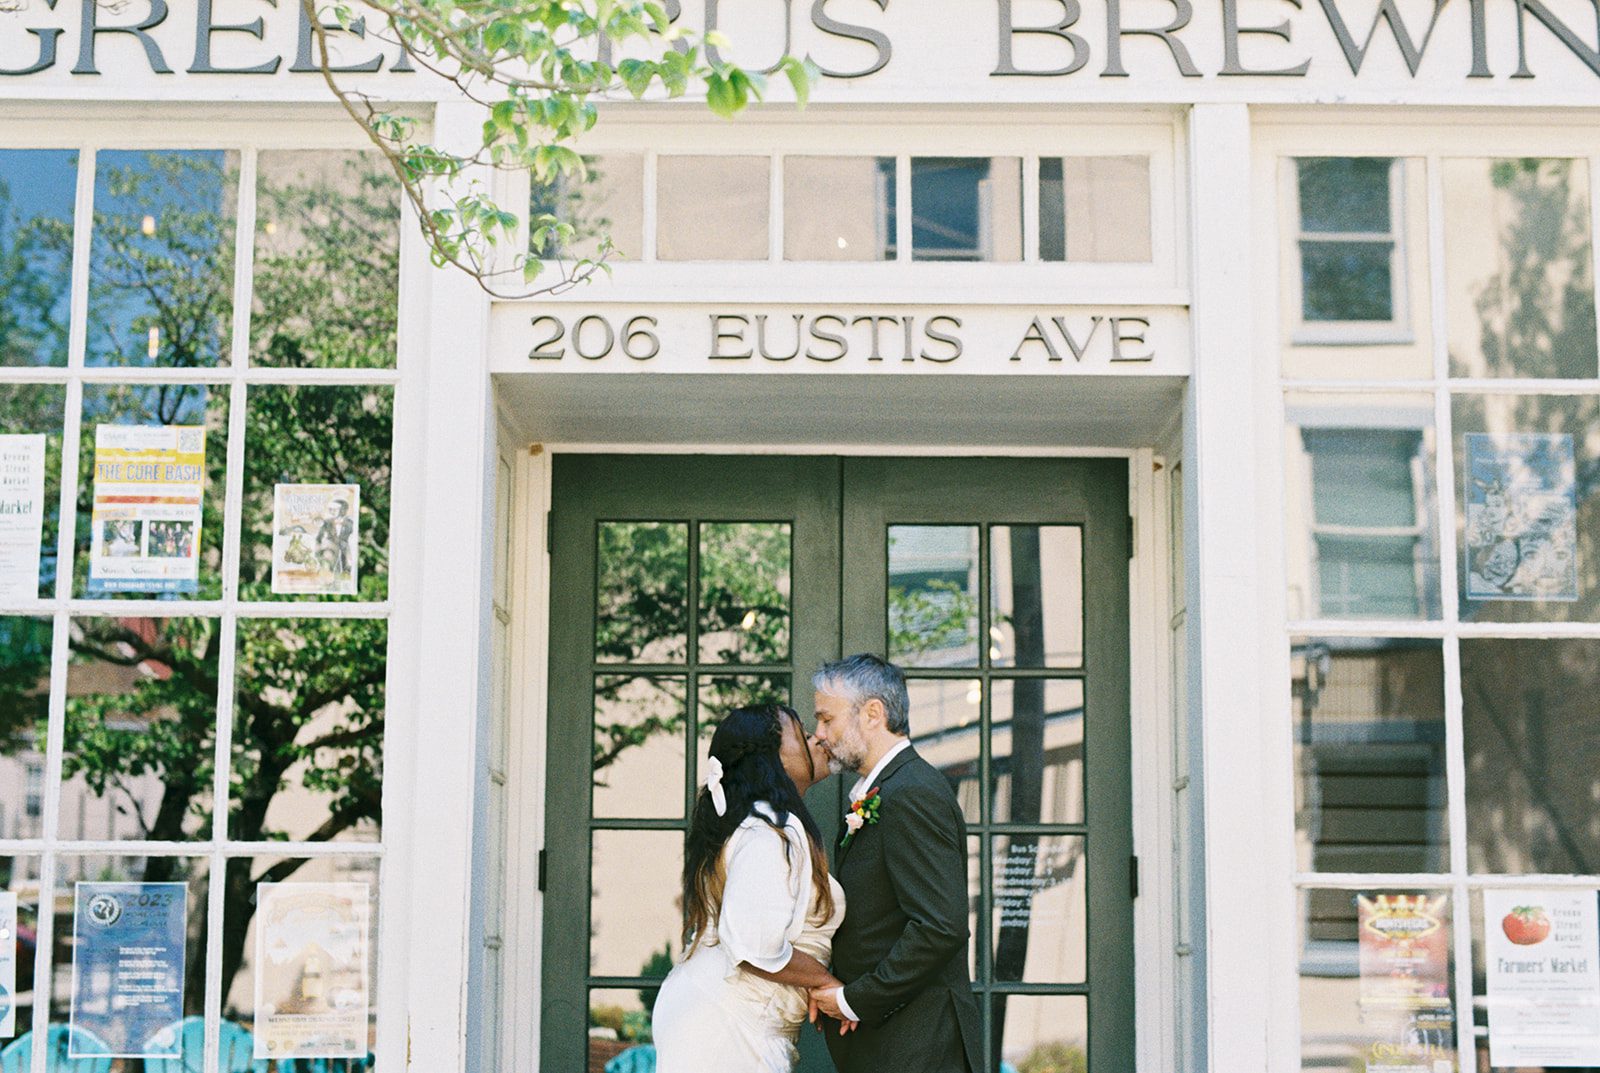 A bride and groom stand in front of Green Bus Brewing in Huntsville, Alabama